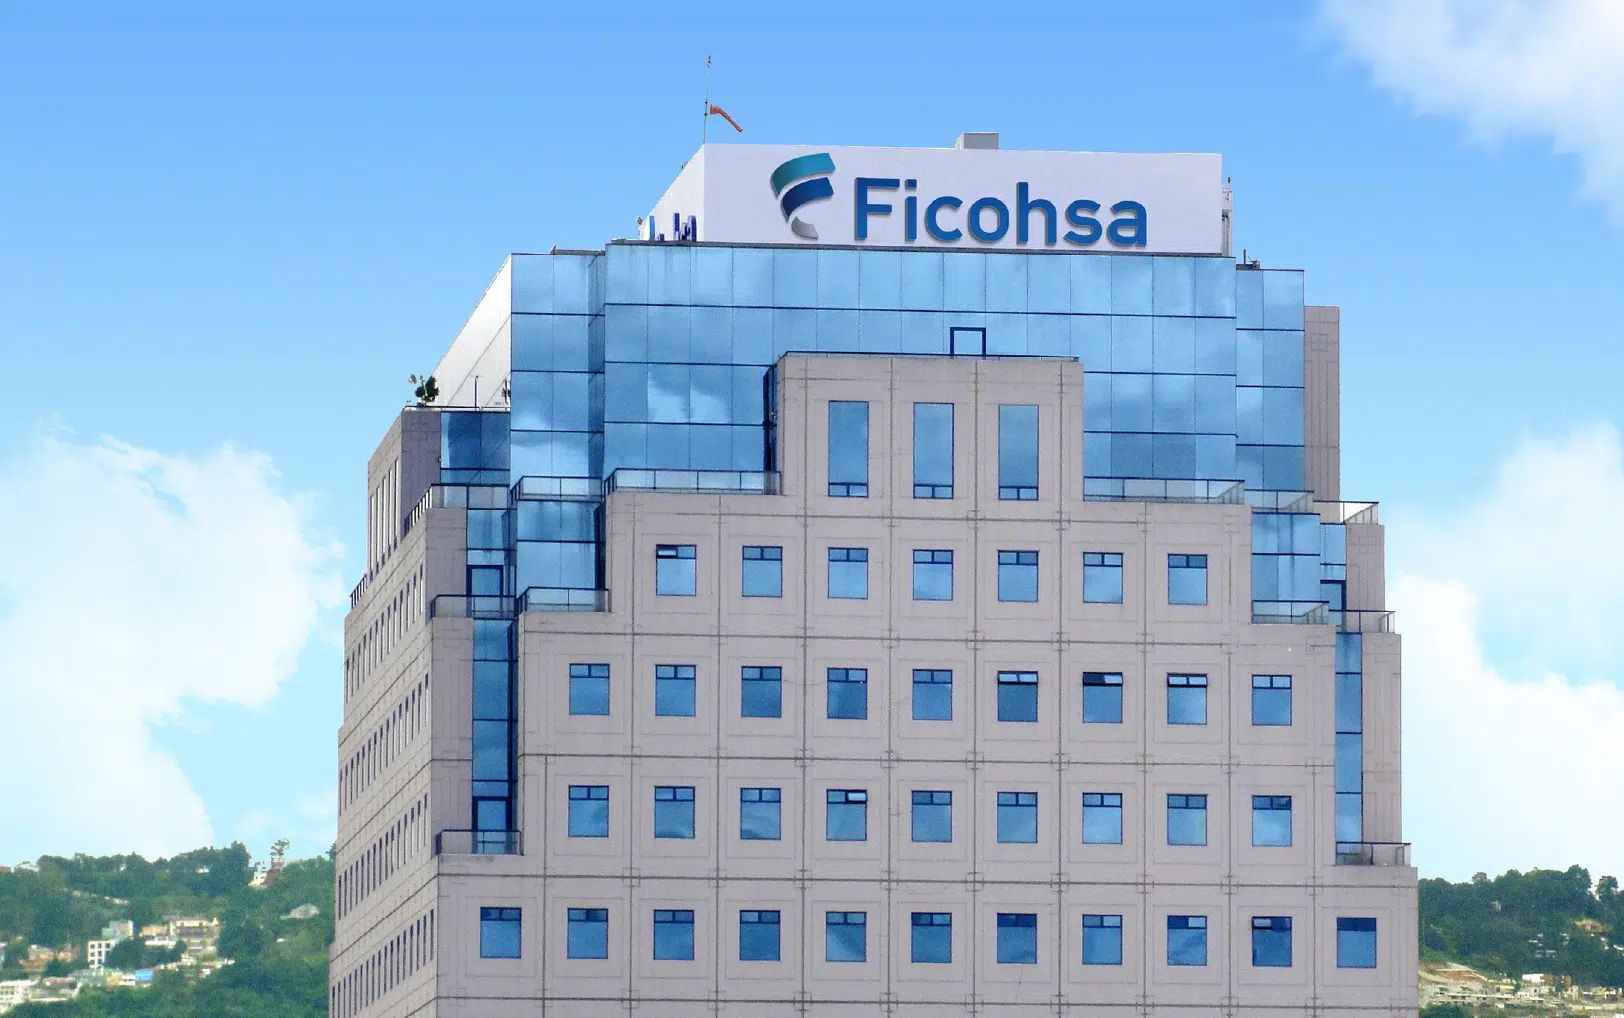 It’s live! Ficohsa has officially implemented Nakisa’s HR Suite 